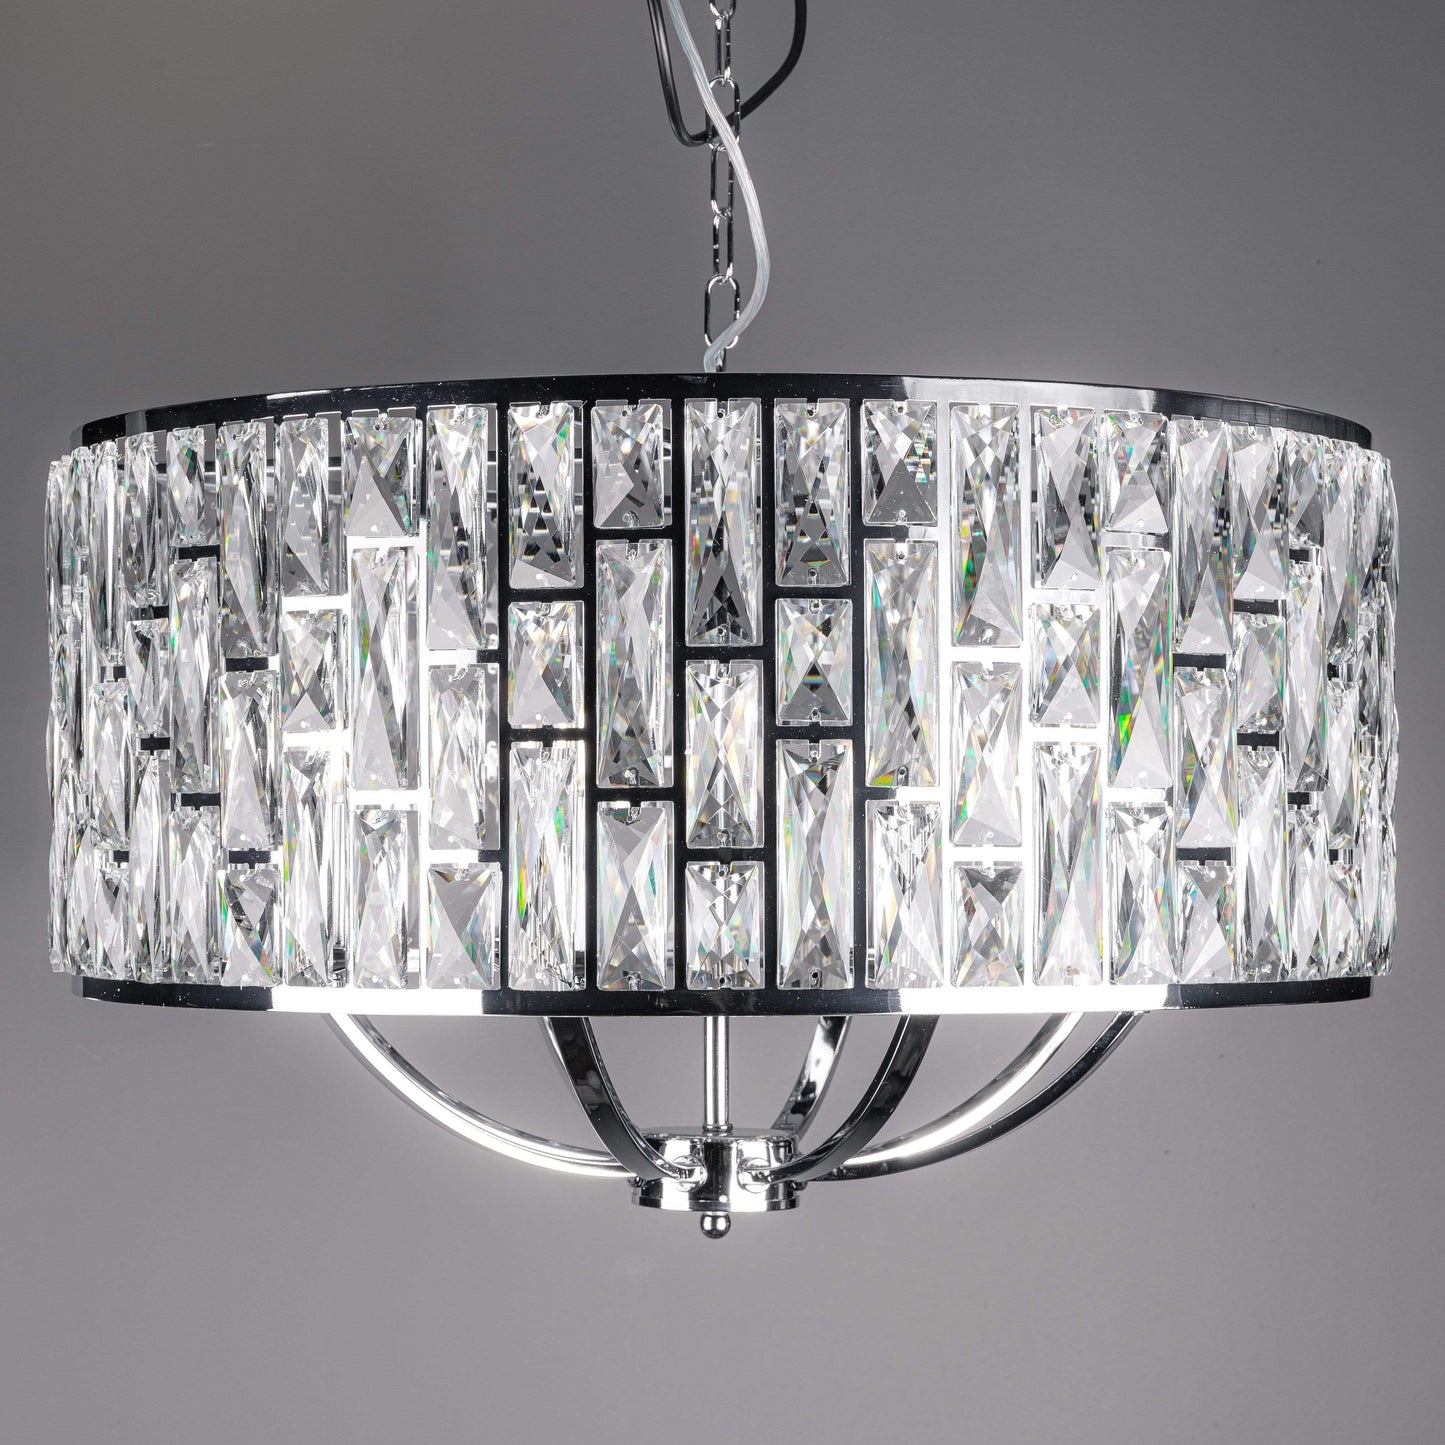 Lights  -  Tasc756588806S 8 Light Polished Chrome Pendant With Crystal Glass Pieces  -  50155567